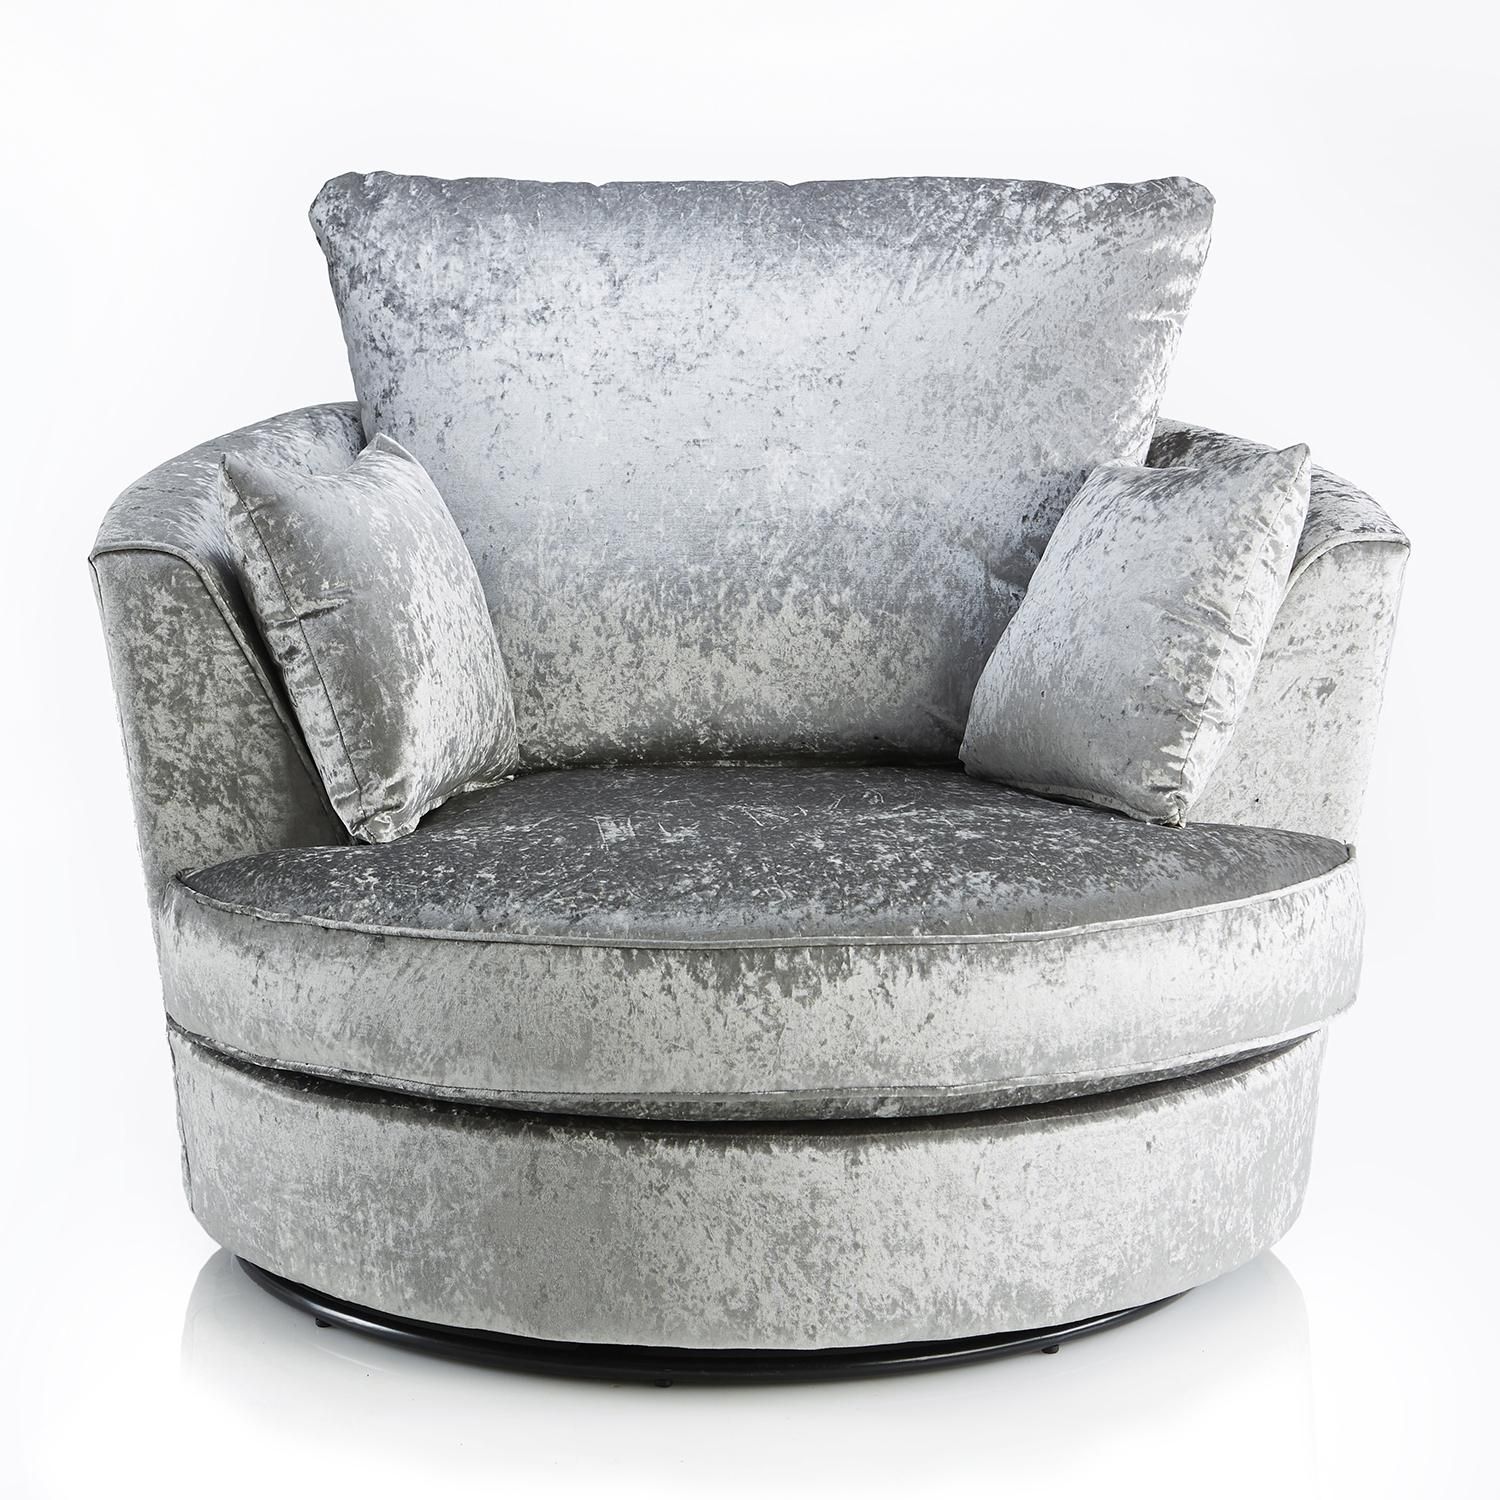 Crushed Velvet Furniture | Sofas, Beds, Chairs, Cushions With Regard To Swivel Sofa Chairs (View 6 of 20)